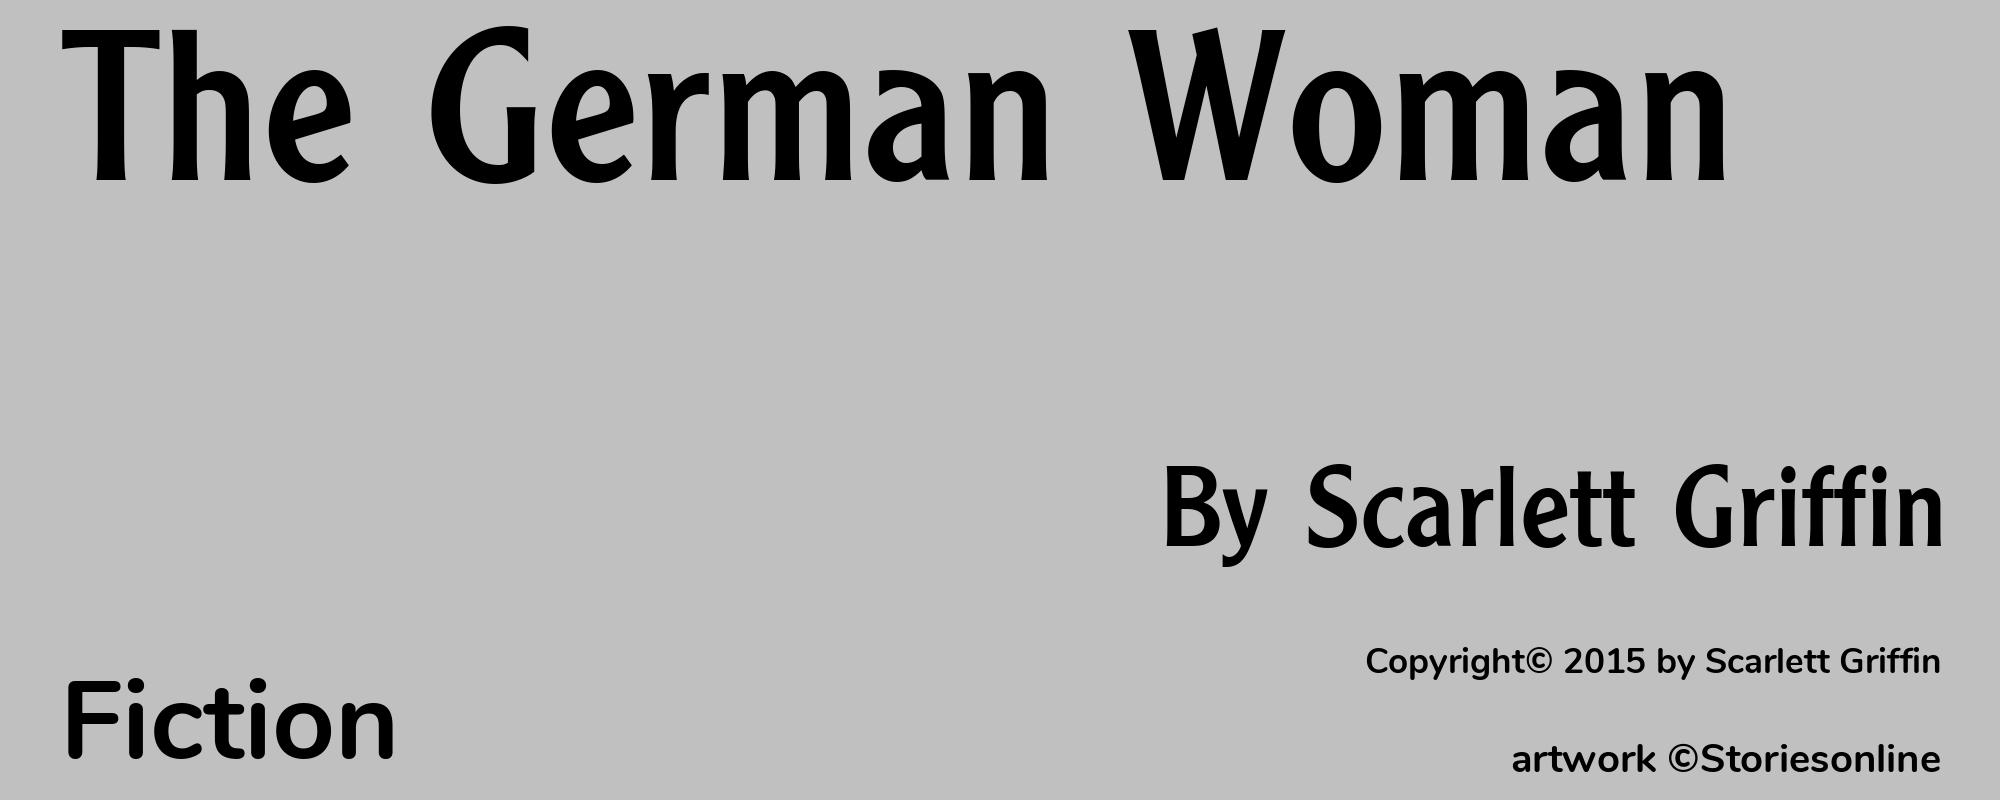 The German Woman - Cover